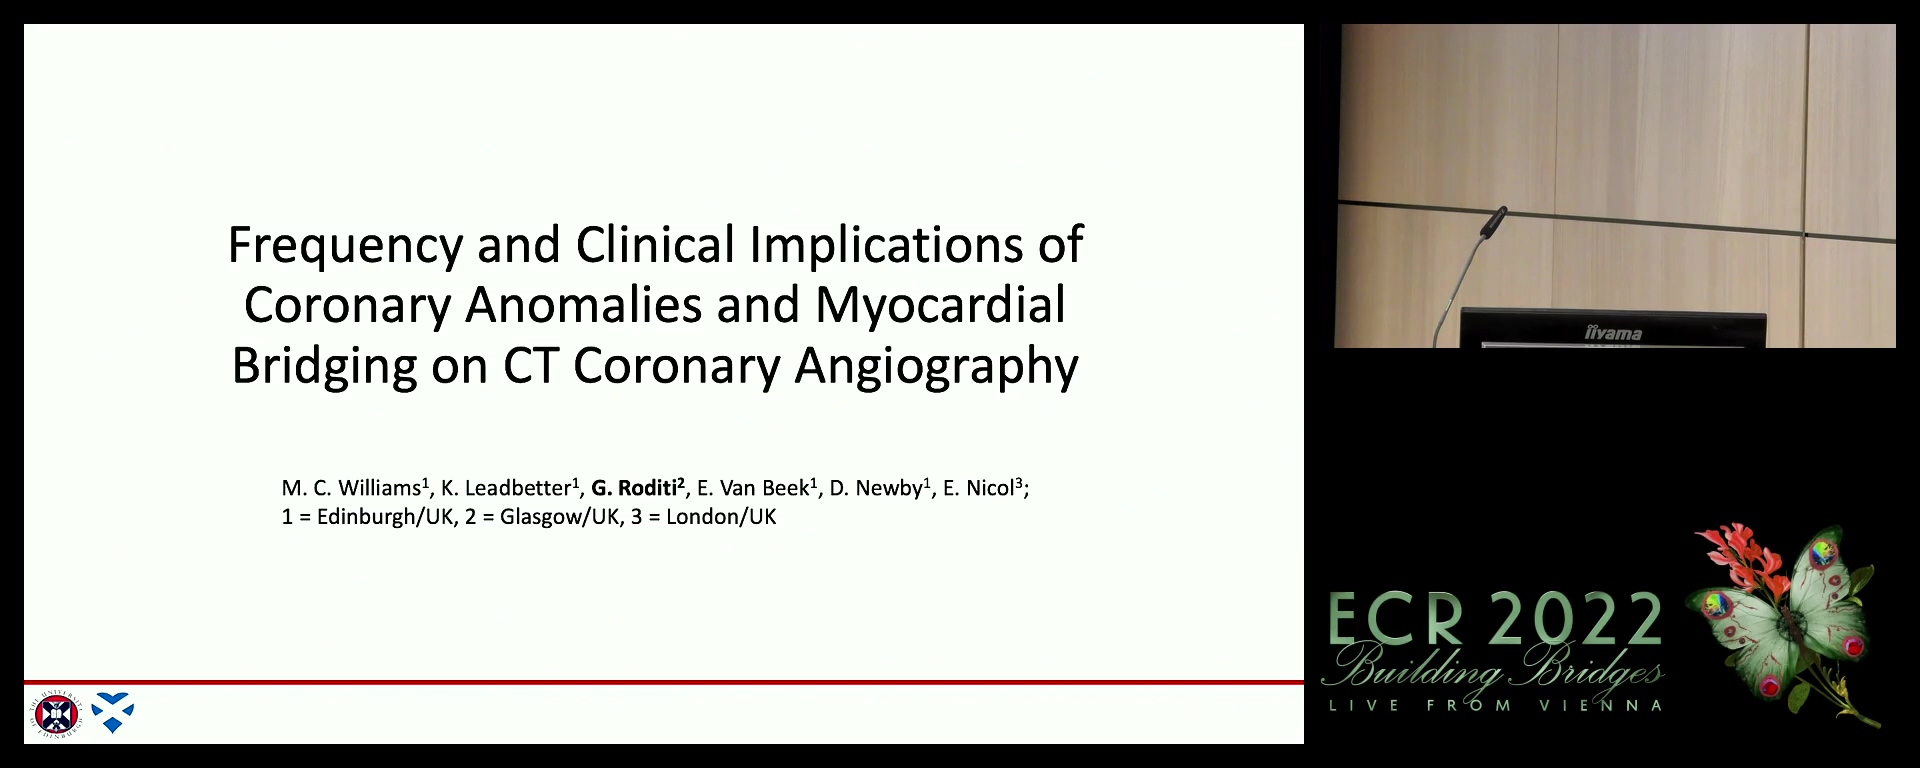 Frequency and clinical implications of coronary anomalies and myocardial bridging on CT coronary angiography - Giles Hannibal Roditi, Glasgow / UK